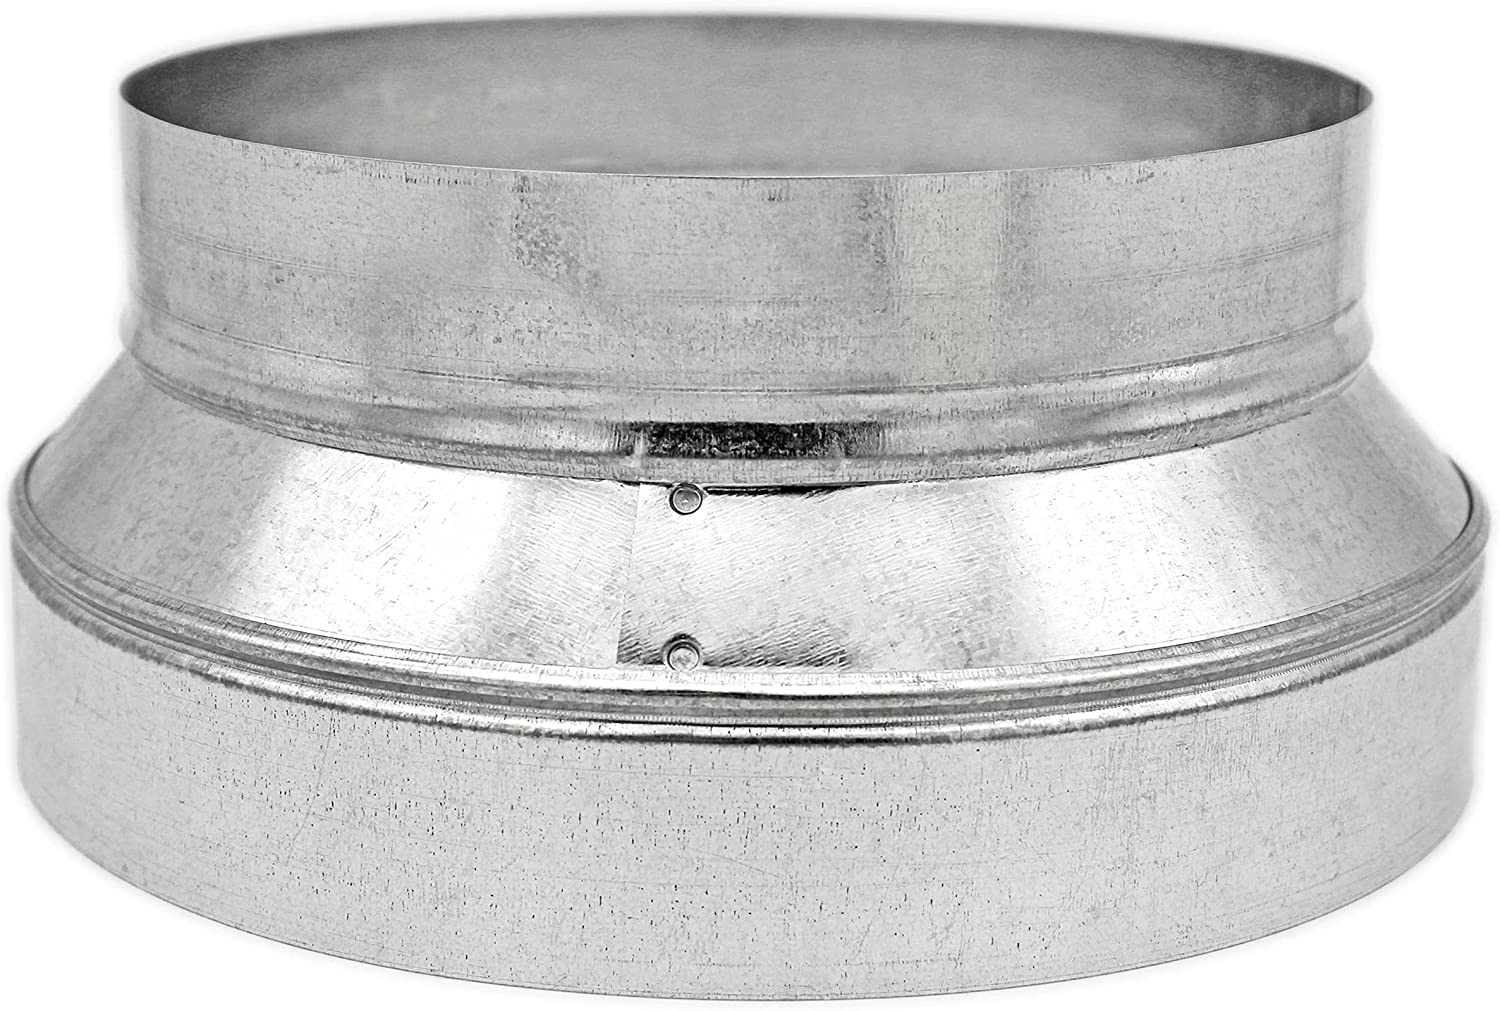 HVAC Premium Round Metal Pipe Reducer & Increaser | 5" to 3" HVAC Duct Reducer or Increaser 30g Gauge | Galvanized Sheet Metal Ducting Connector is Compatible with Duct 3"